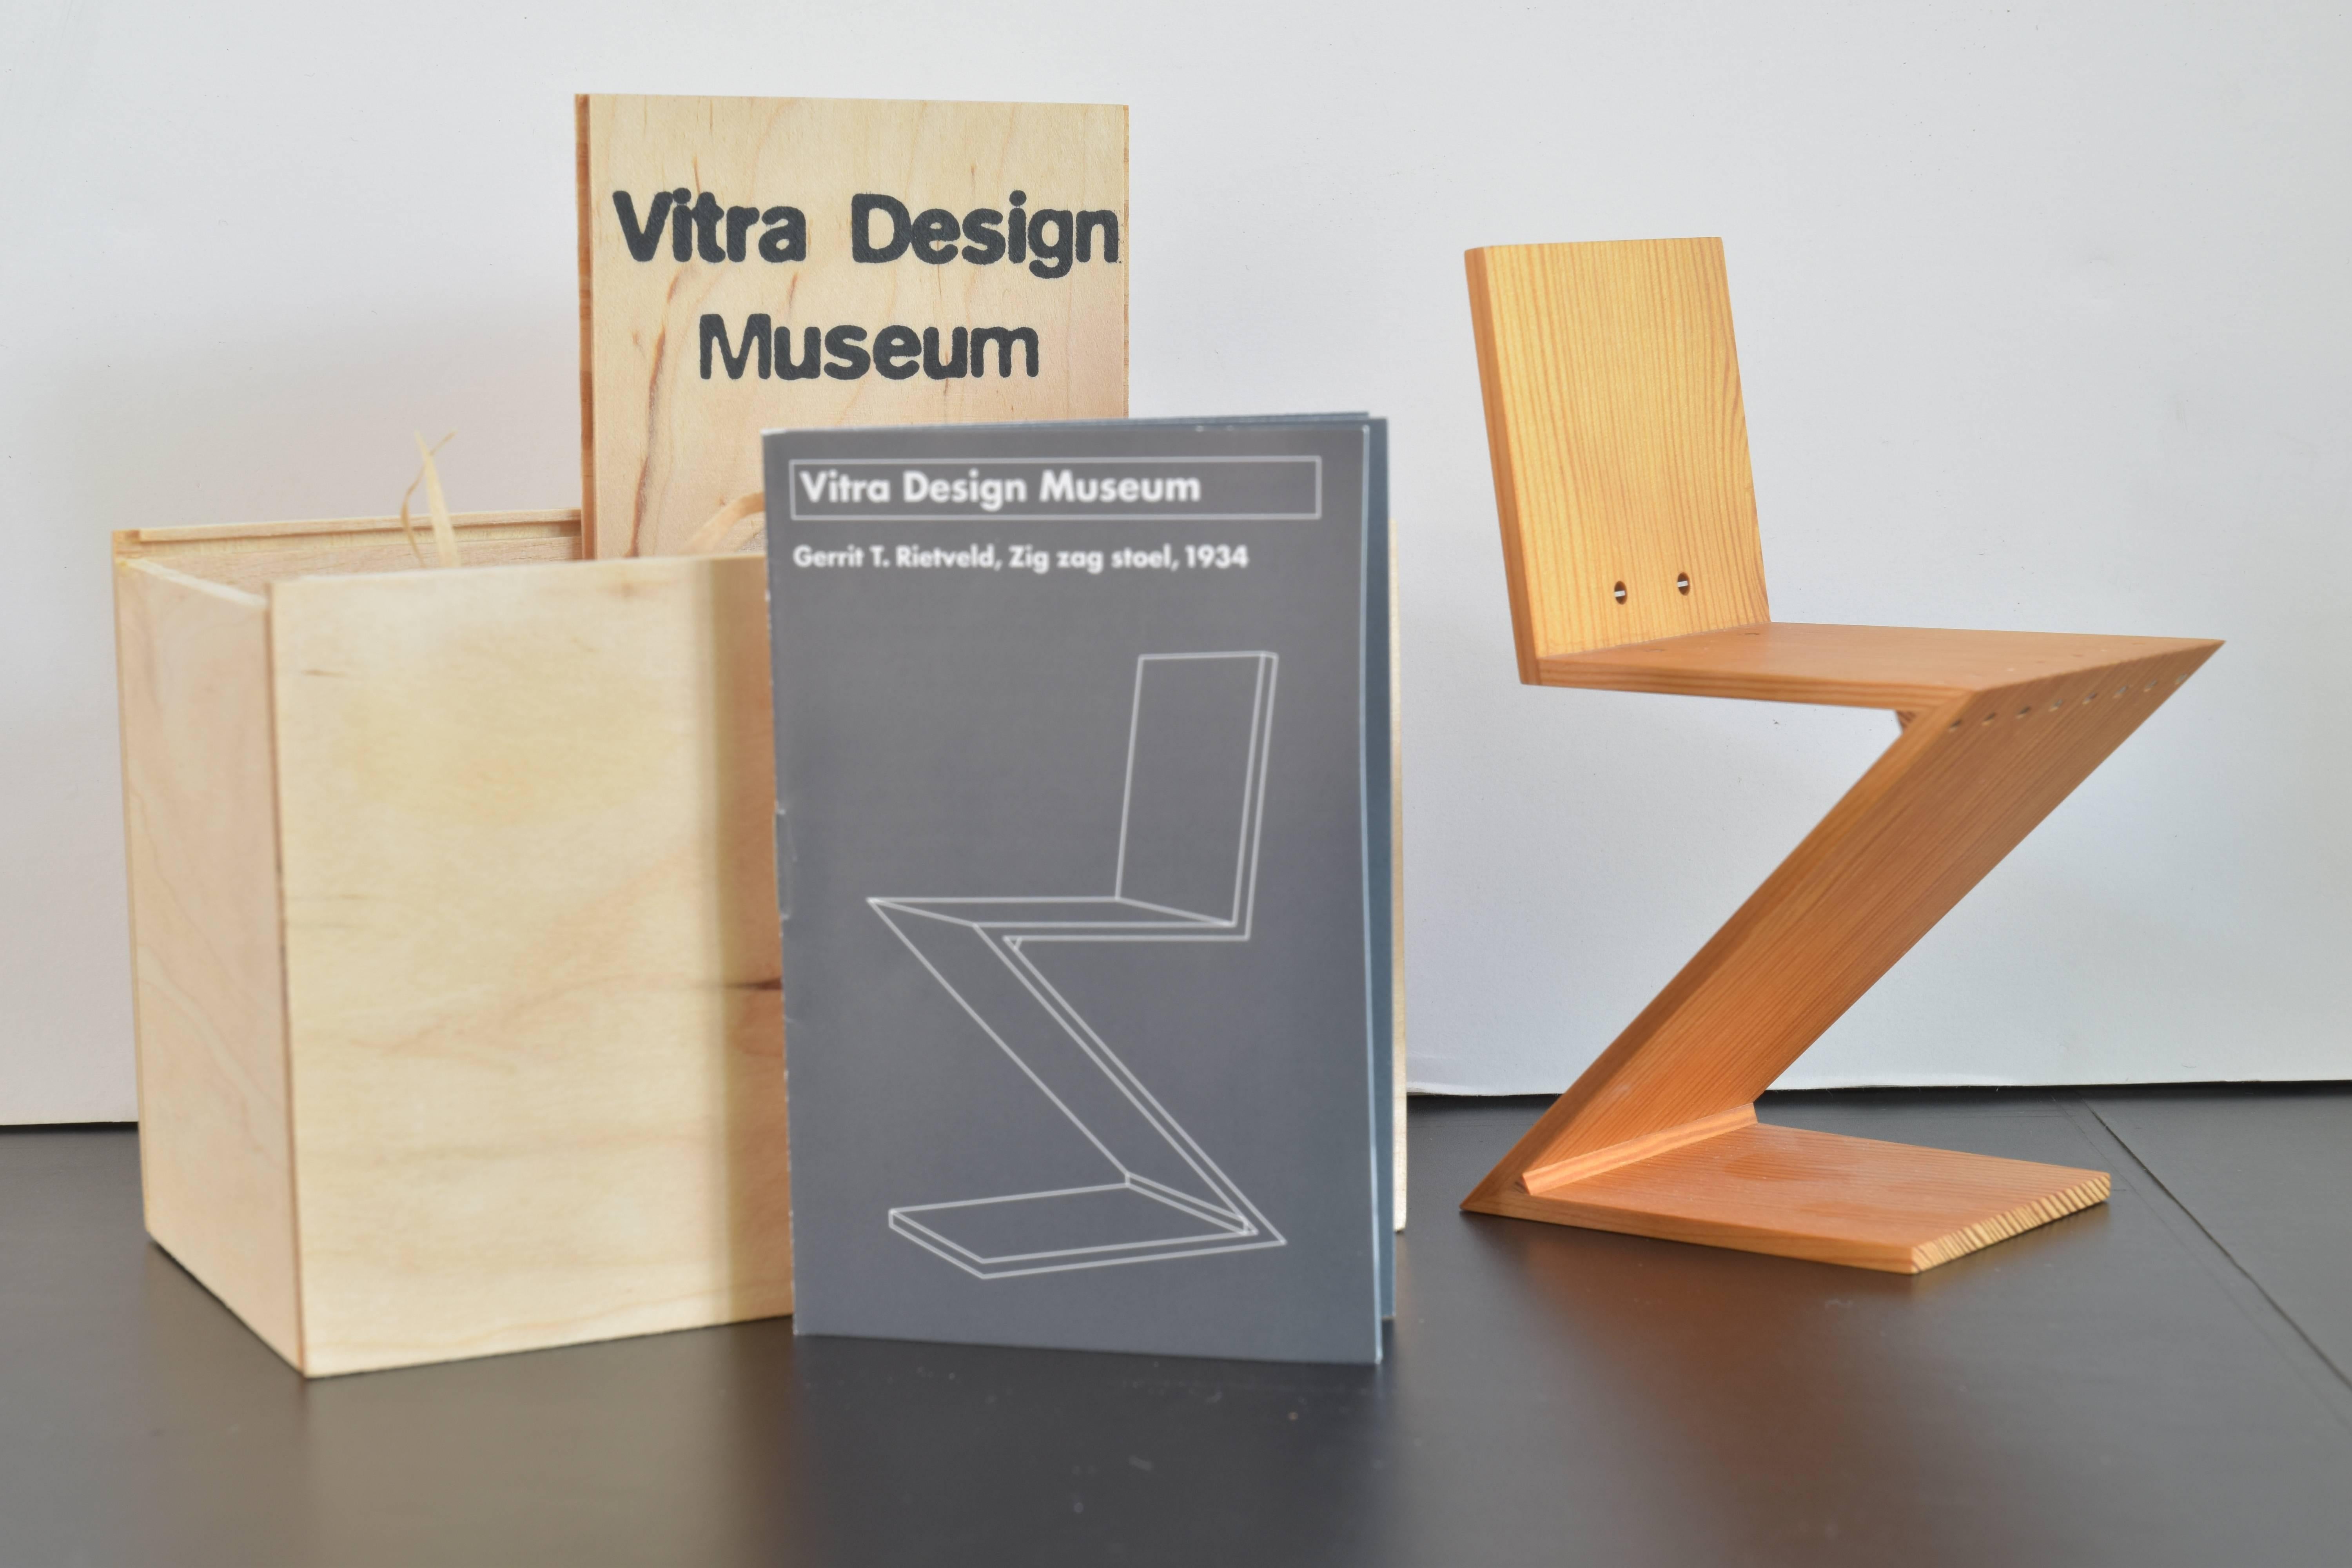 Vitro Design Museum miniature model from the original Gerrit T. Rietveld zig zag Stool manufactured in 1937.

This model is after an original made by G. Van De Groenekan for Rietveld in 1935, manufactured by the Vitra Design Museum with permission